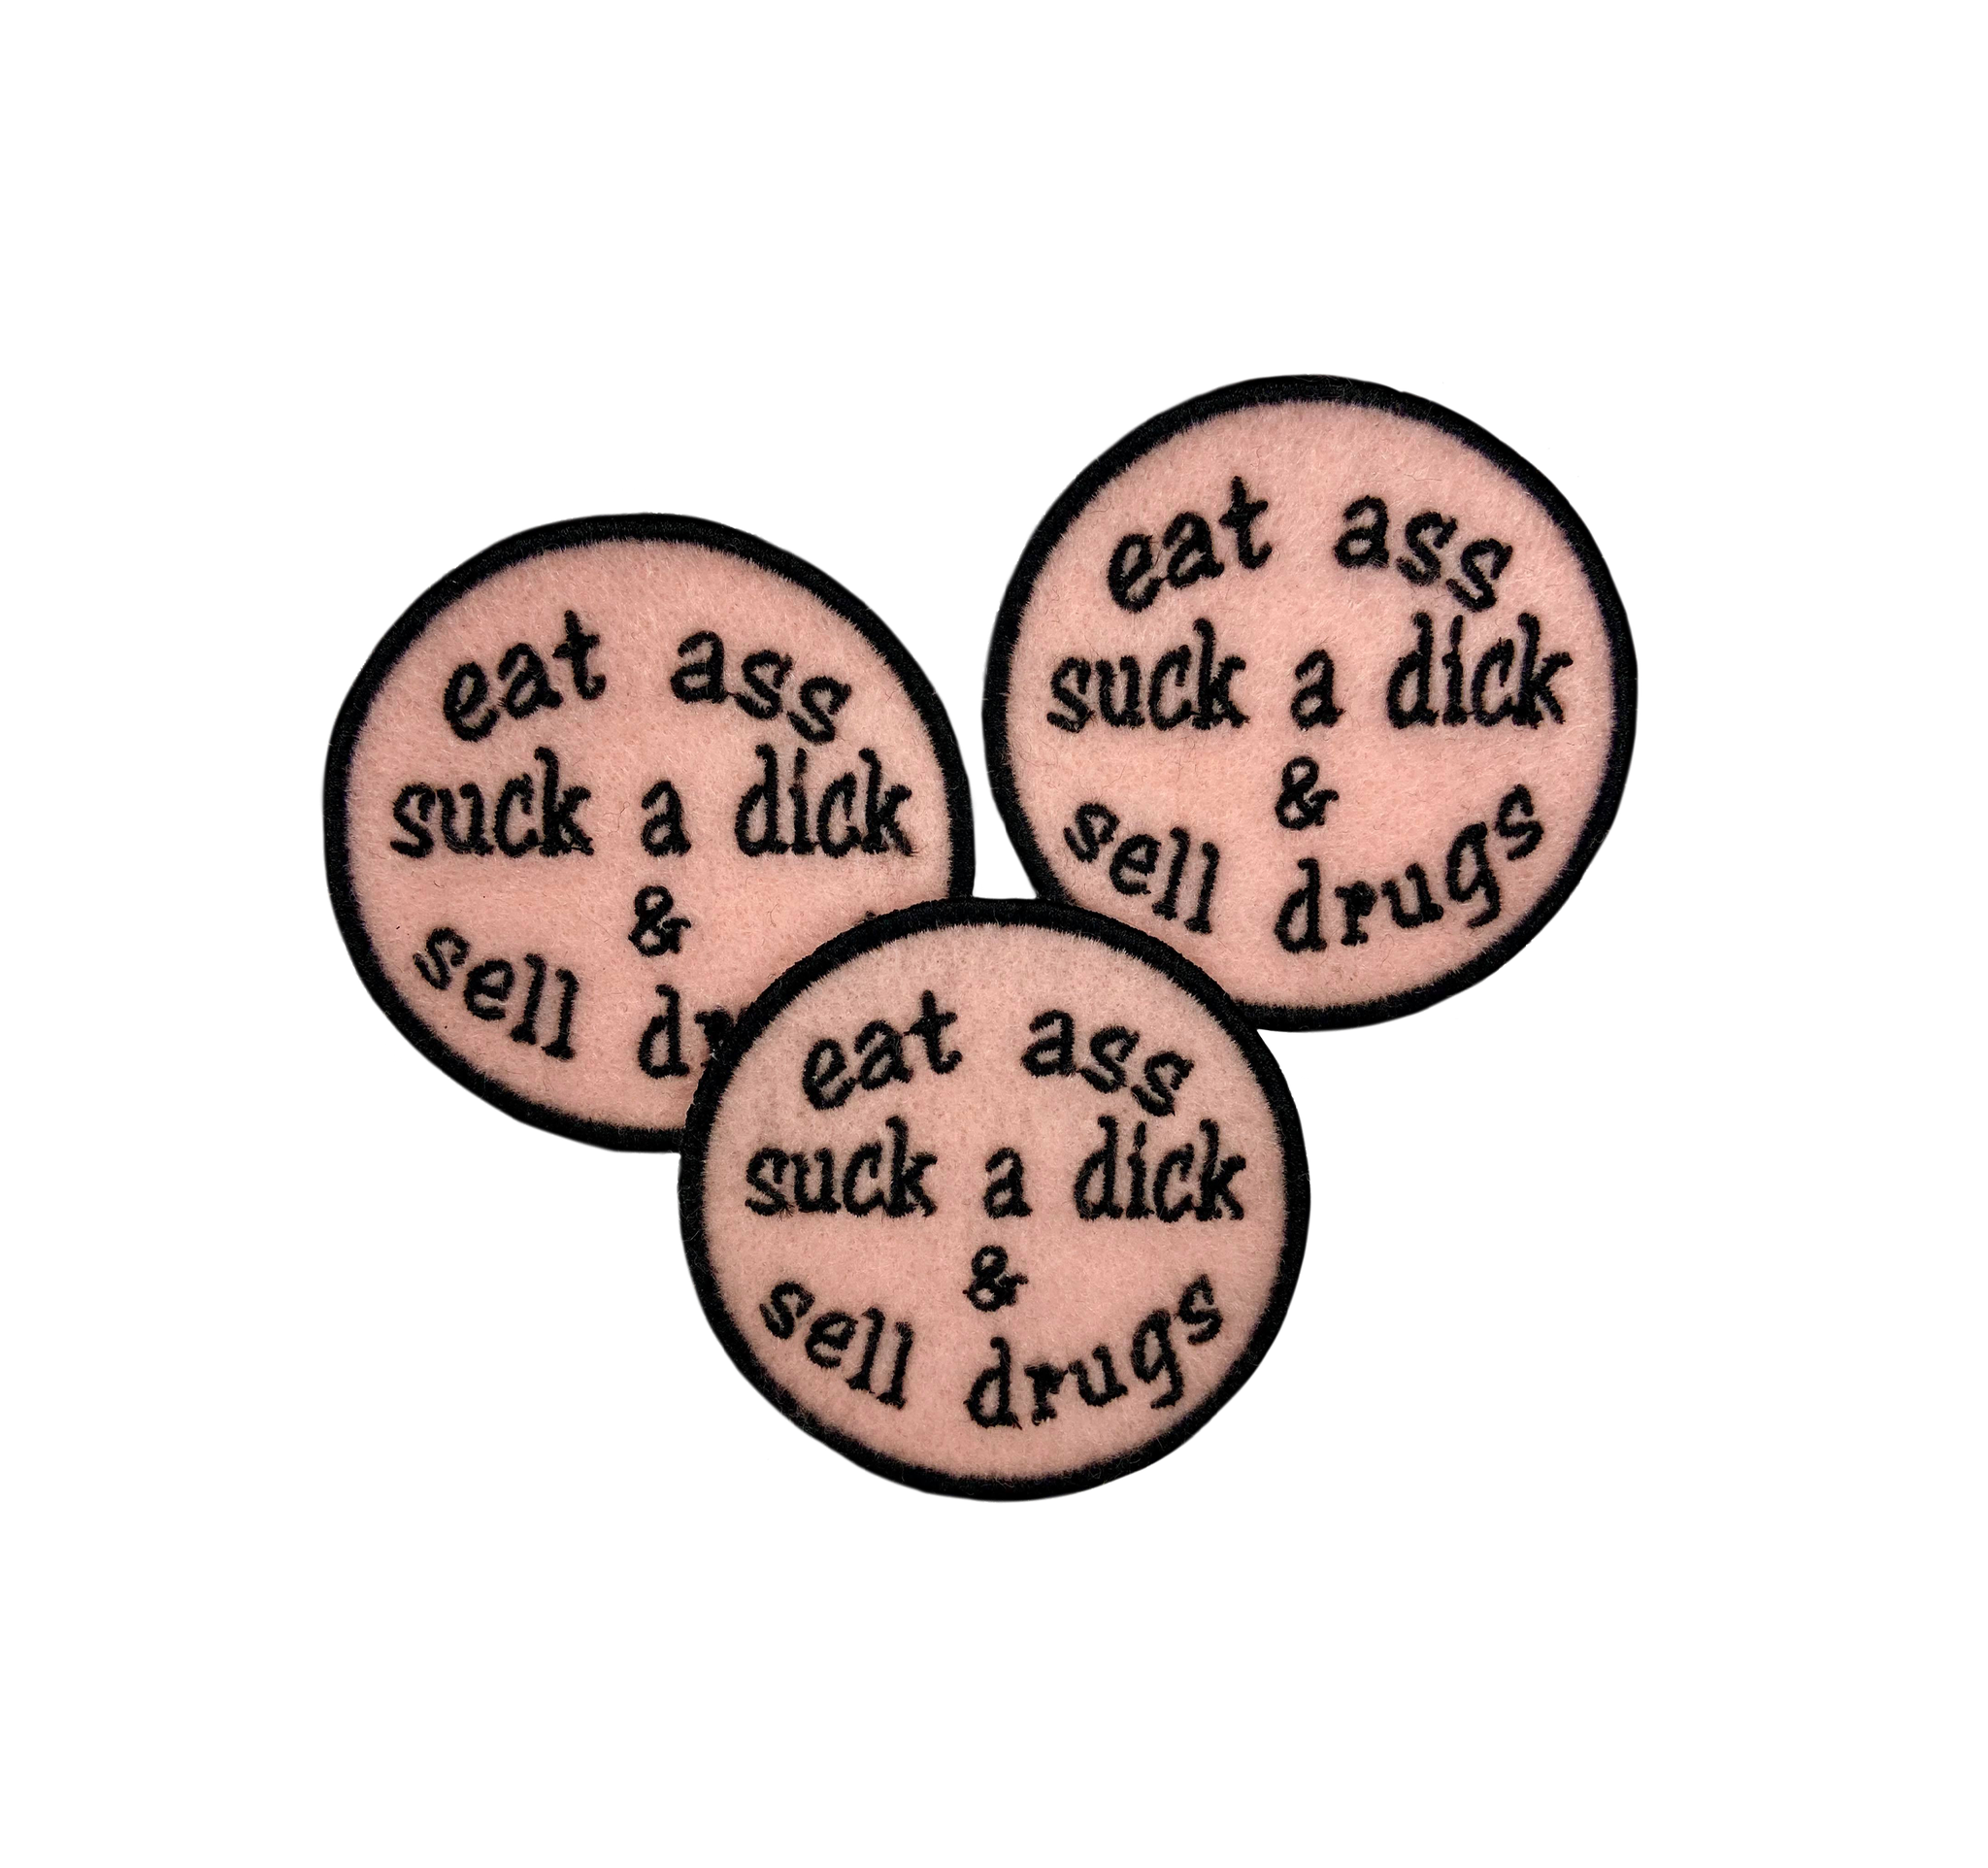 Eat Ass Suck a Dick and Sell Drugs Embroidered Iron-on Patch - IncredibleGood Inc